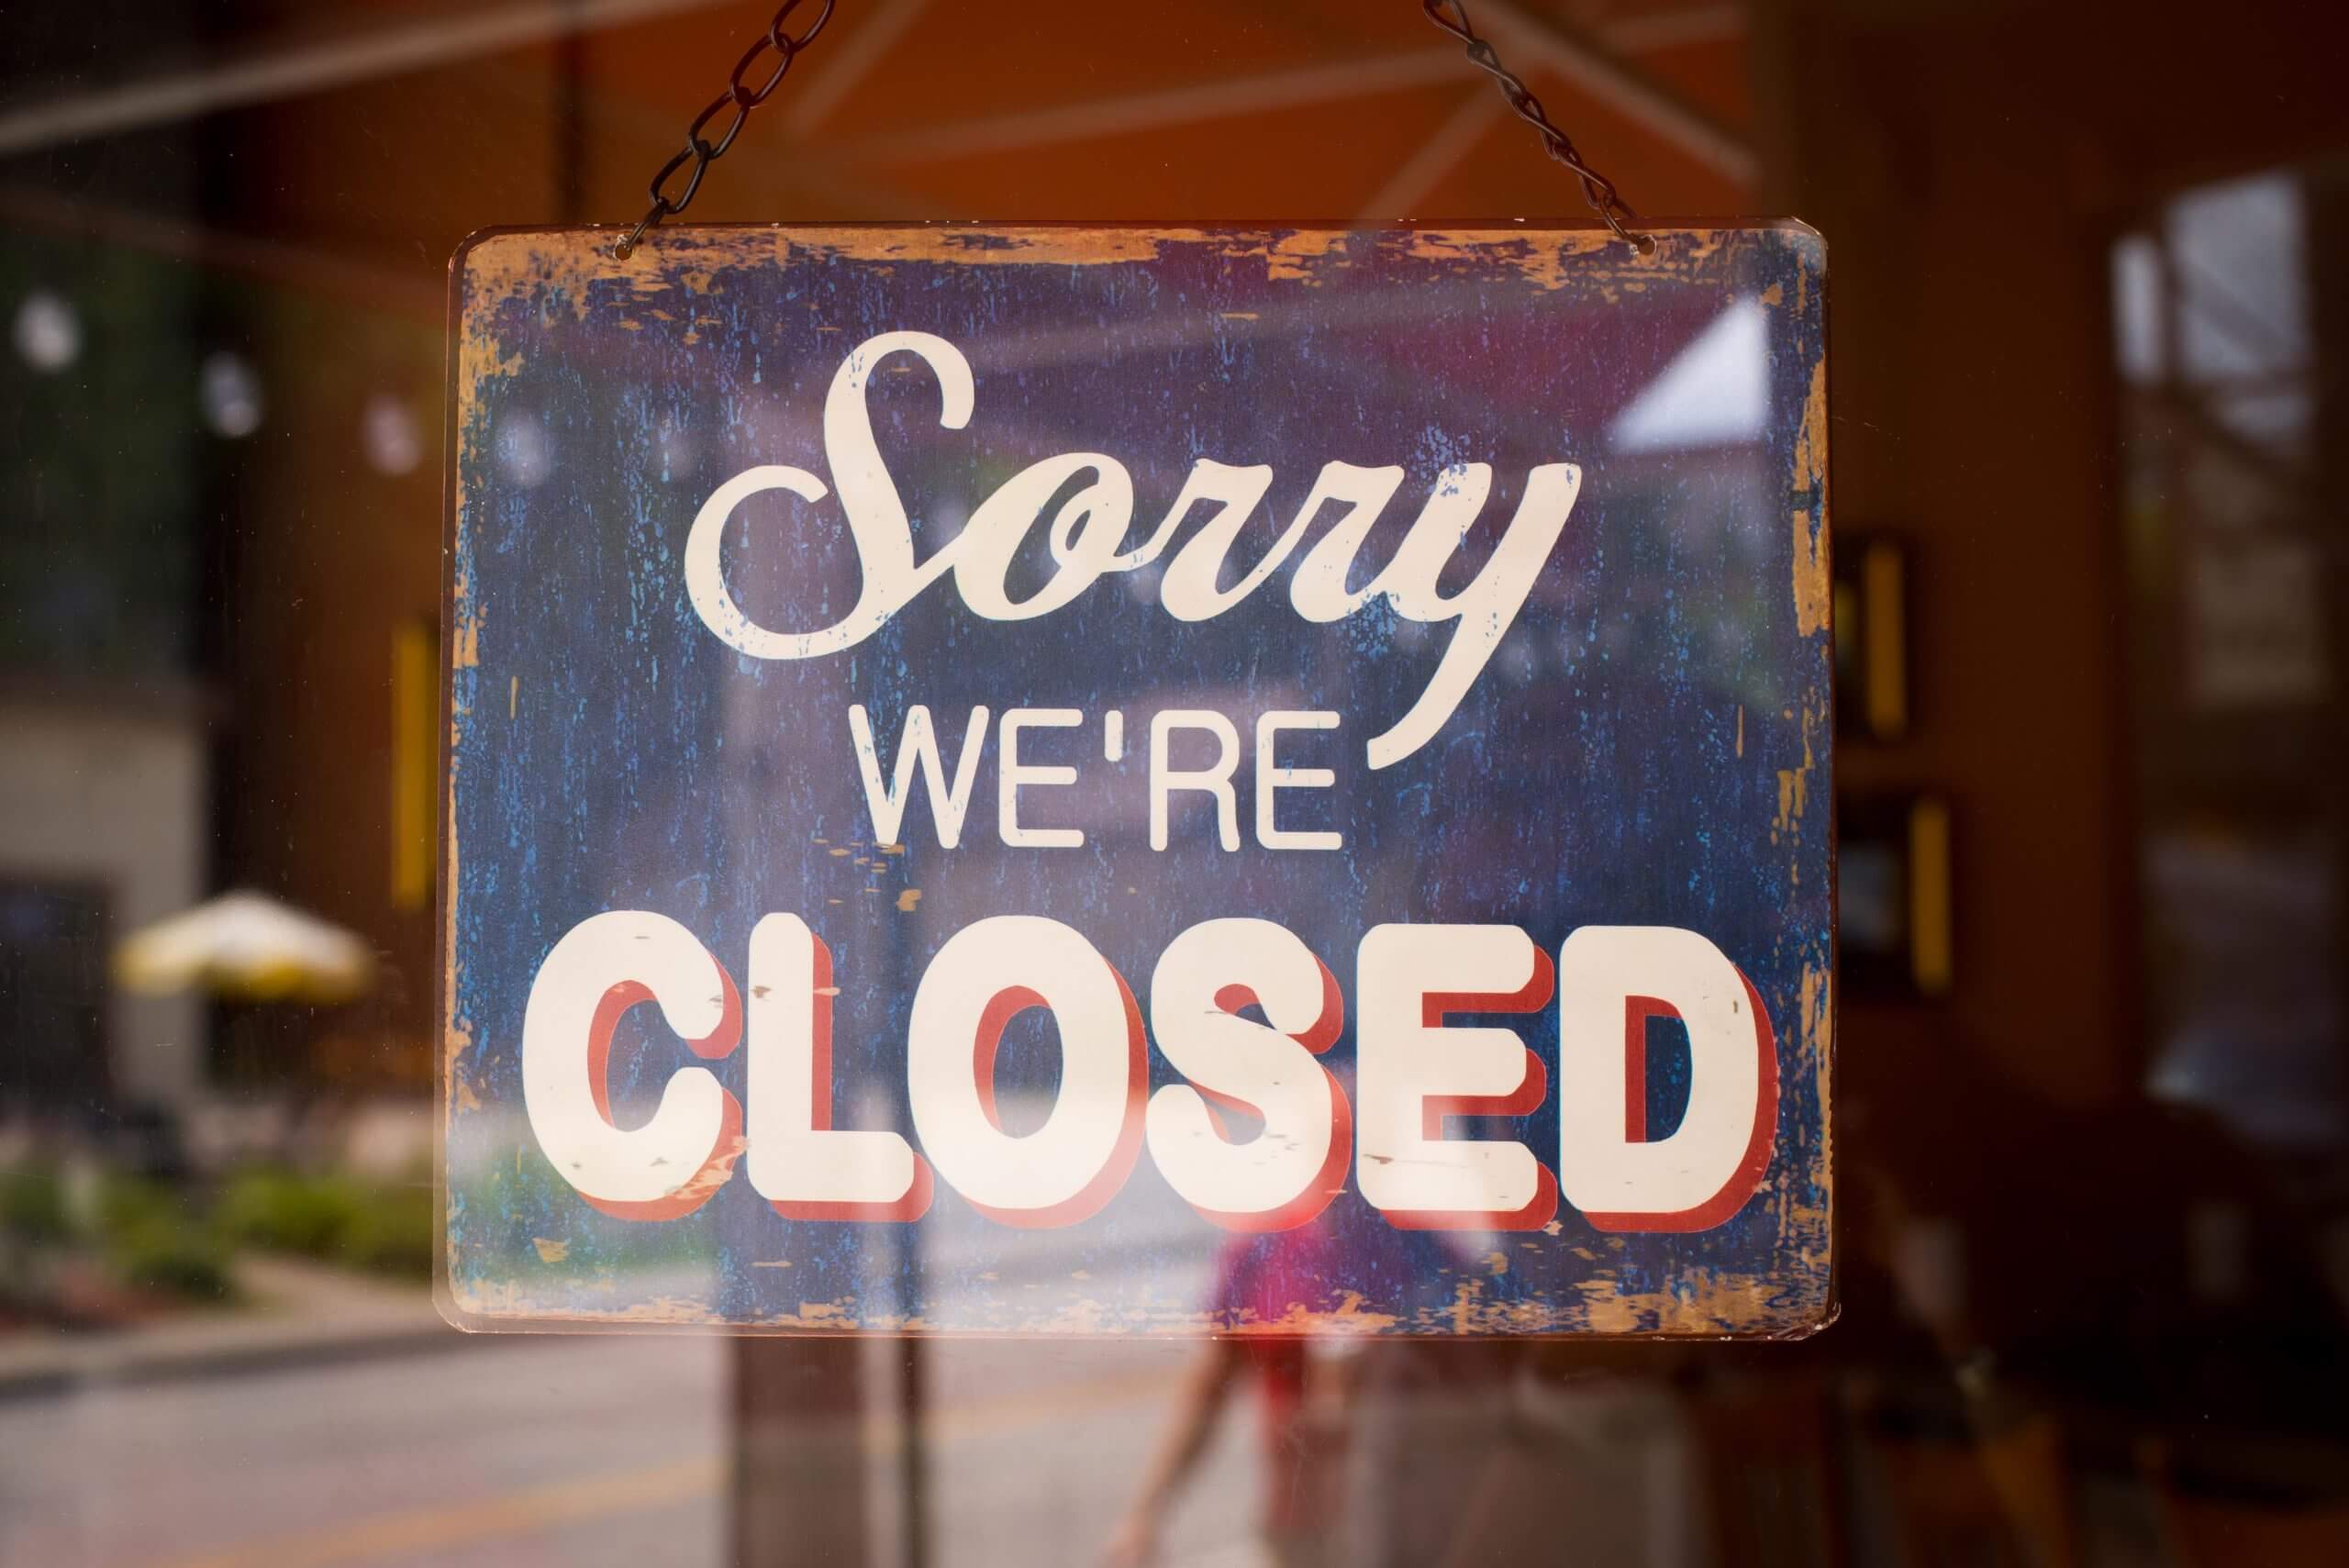 A view from the outside of a glass door looking in at a sign that reads "Sorry we're closed."